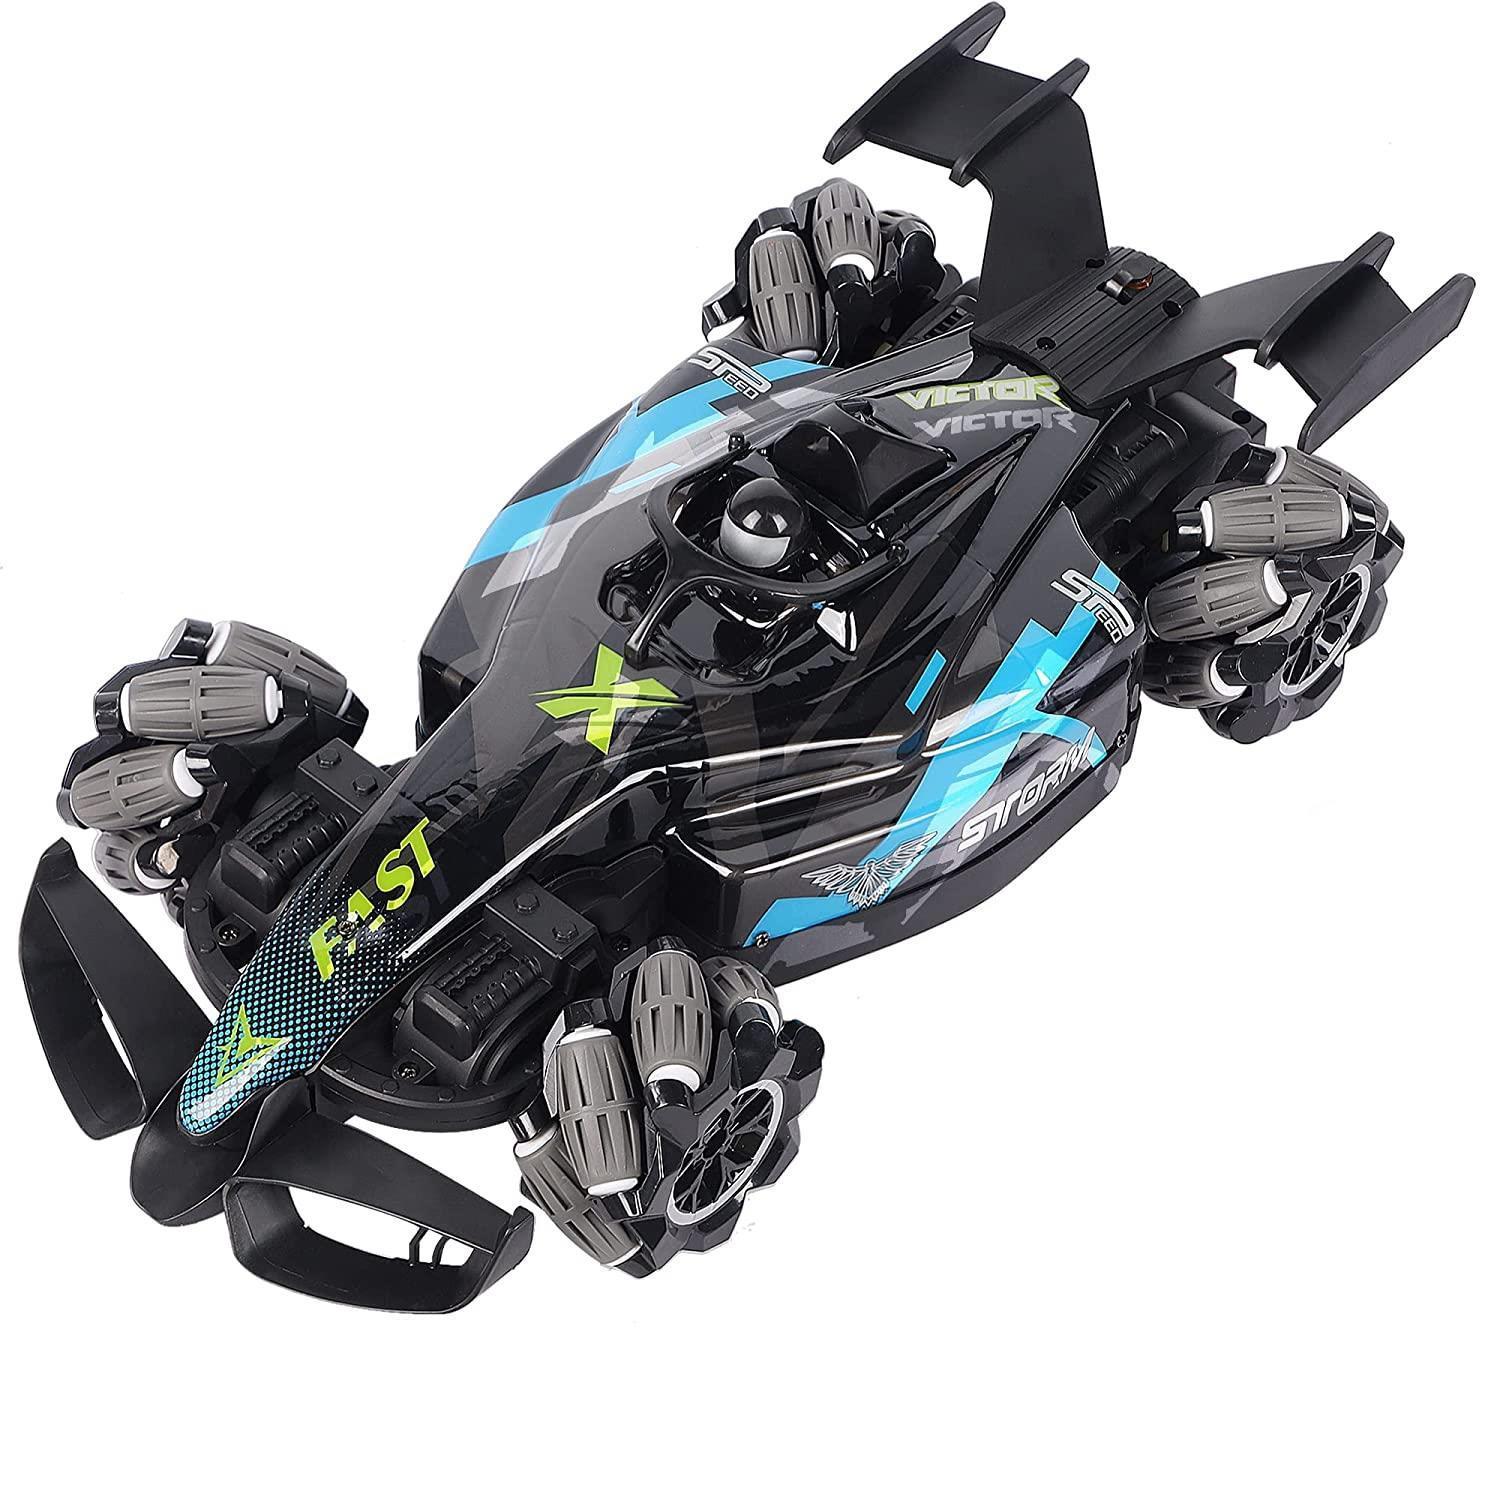 Remote Control Stunt Car, Four-Wheel Drive RC Stunt Vehicle with Music and Lights